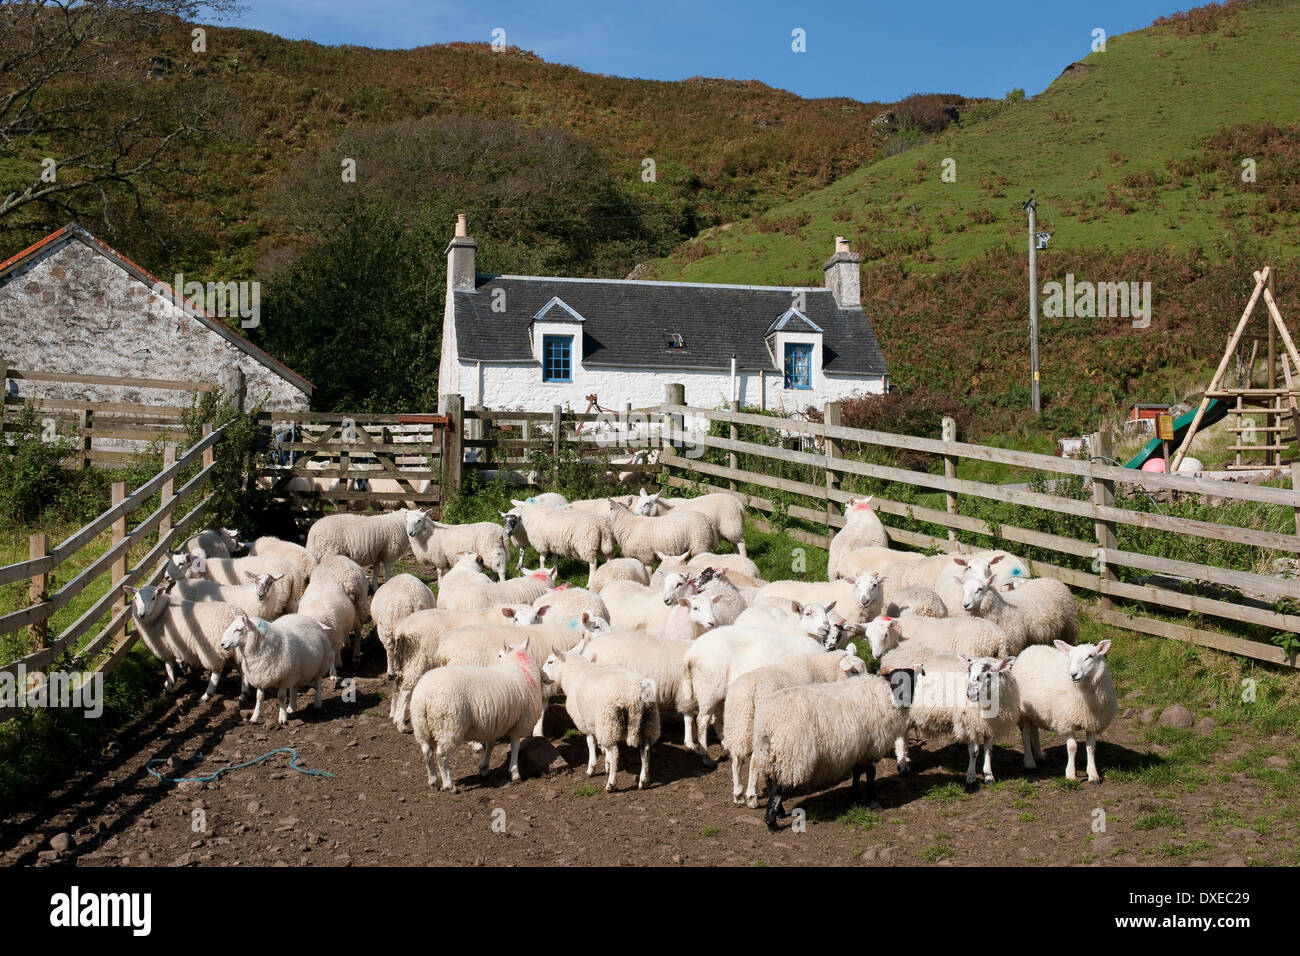 Sheep in pen at croft at the south end of Kerrera,an island nr Oban,Argyll.scotland Stock Photo